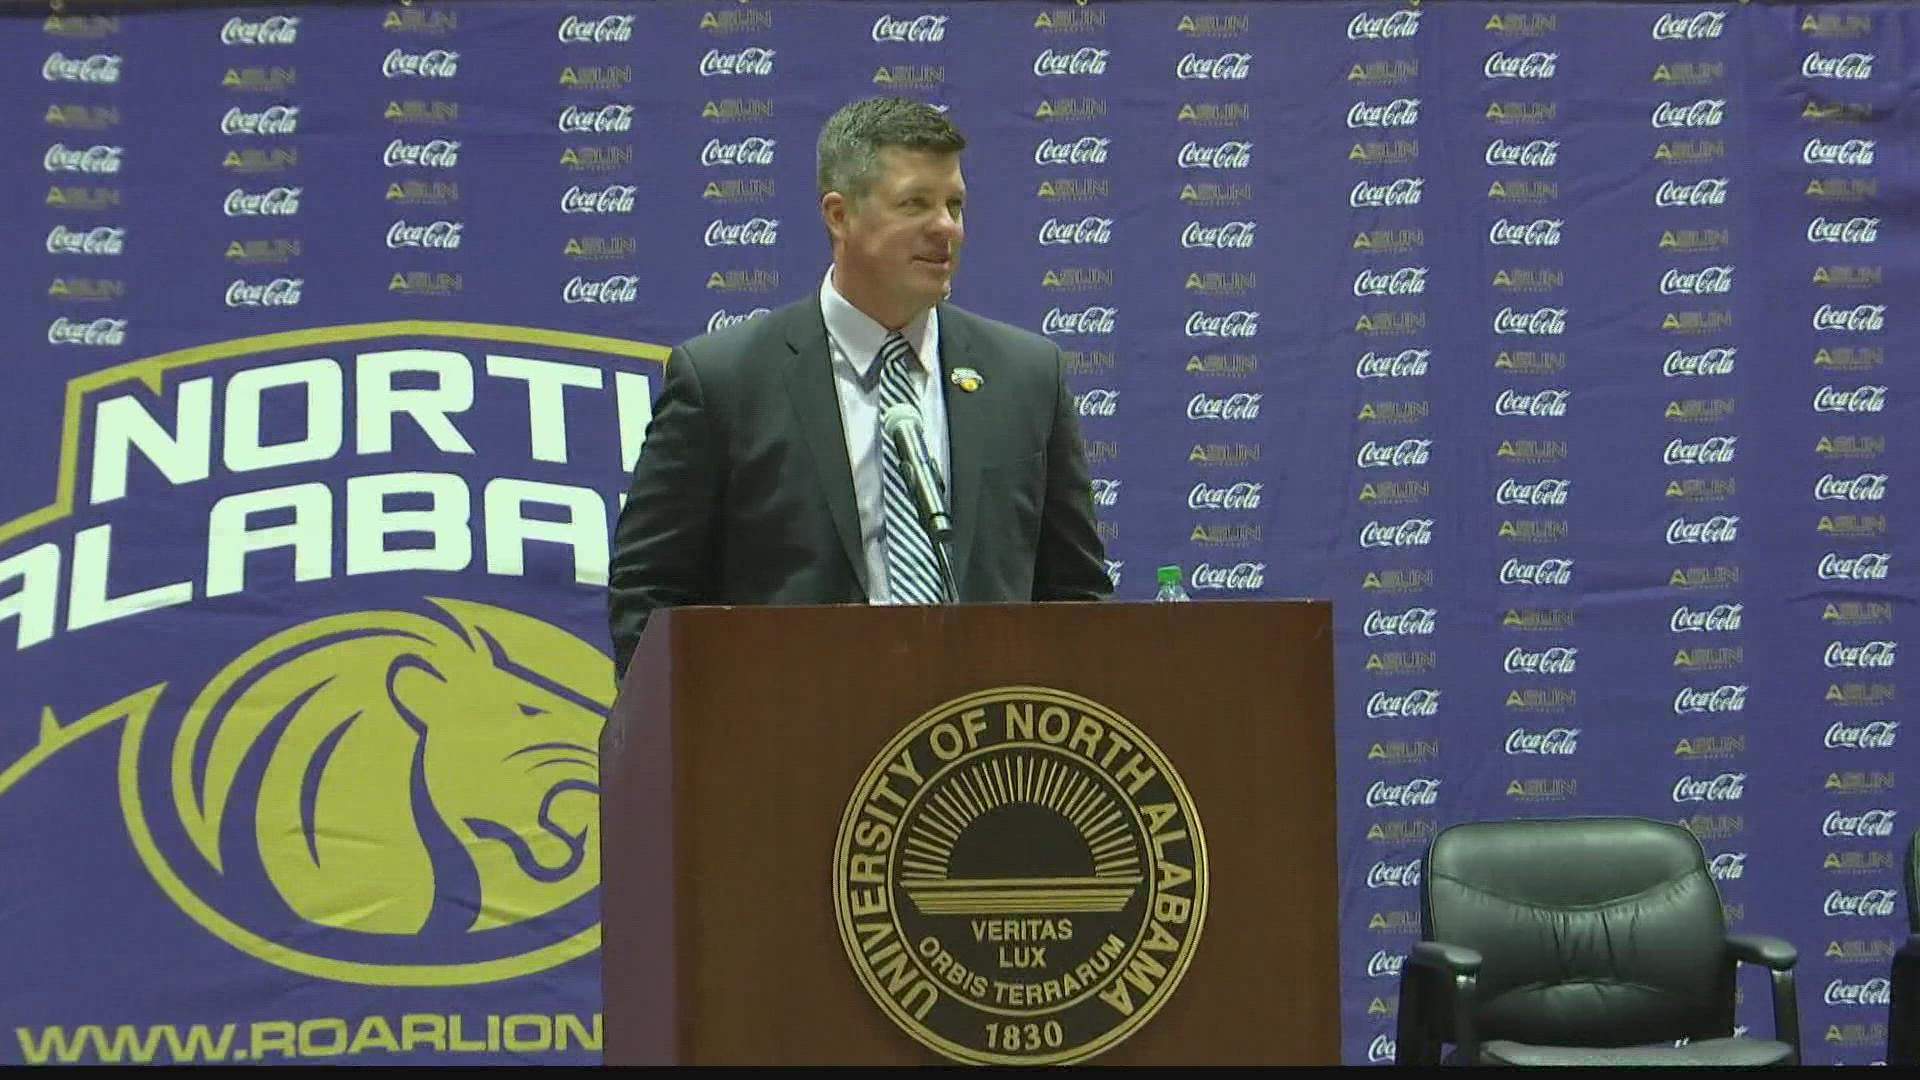 After a nationwide search, officials at the University of North Alabama, introduced Dr. Josh Looney, the school's new Athletic Director to the Lions' family.